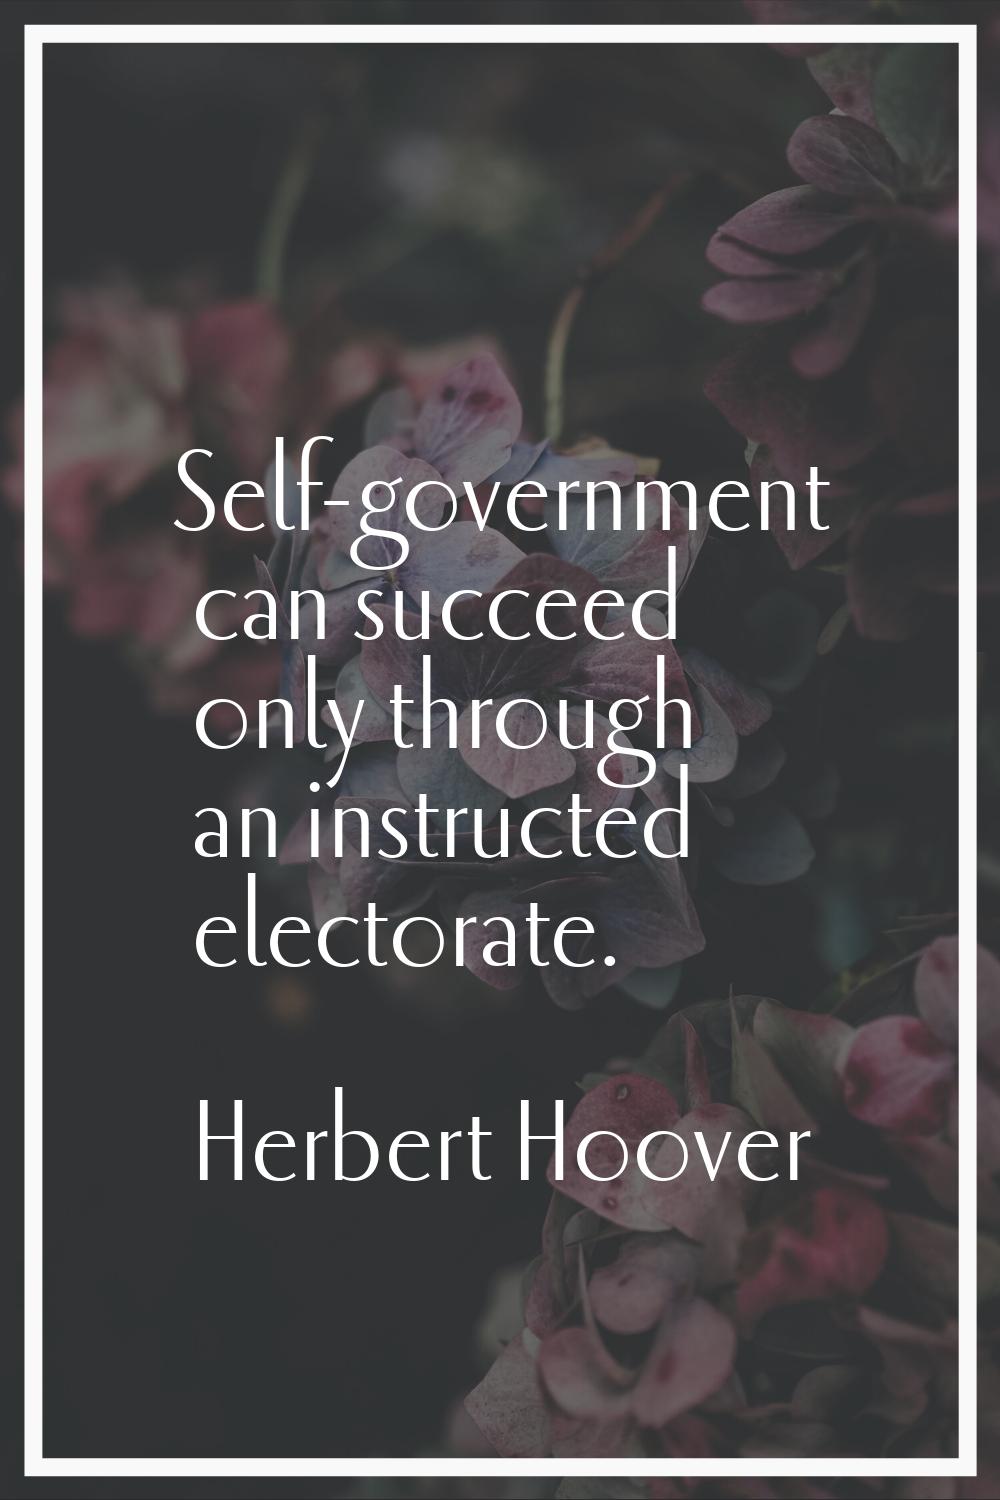 Self-government can succeed only through an instructed electorate.